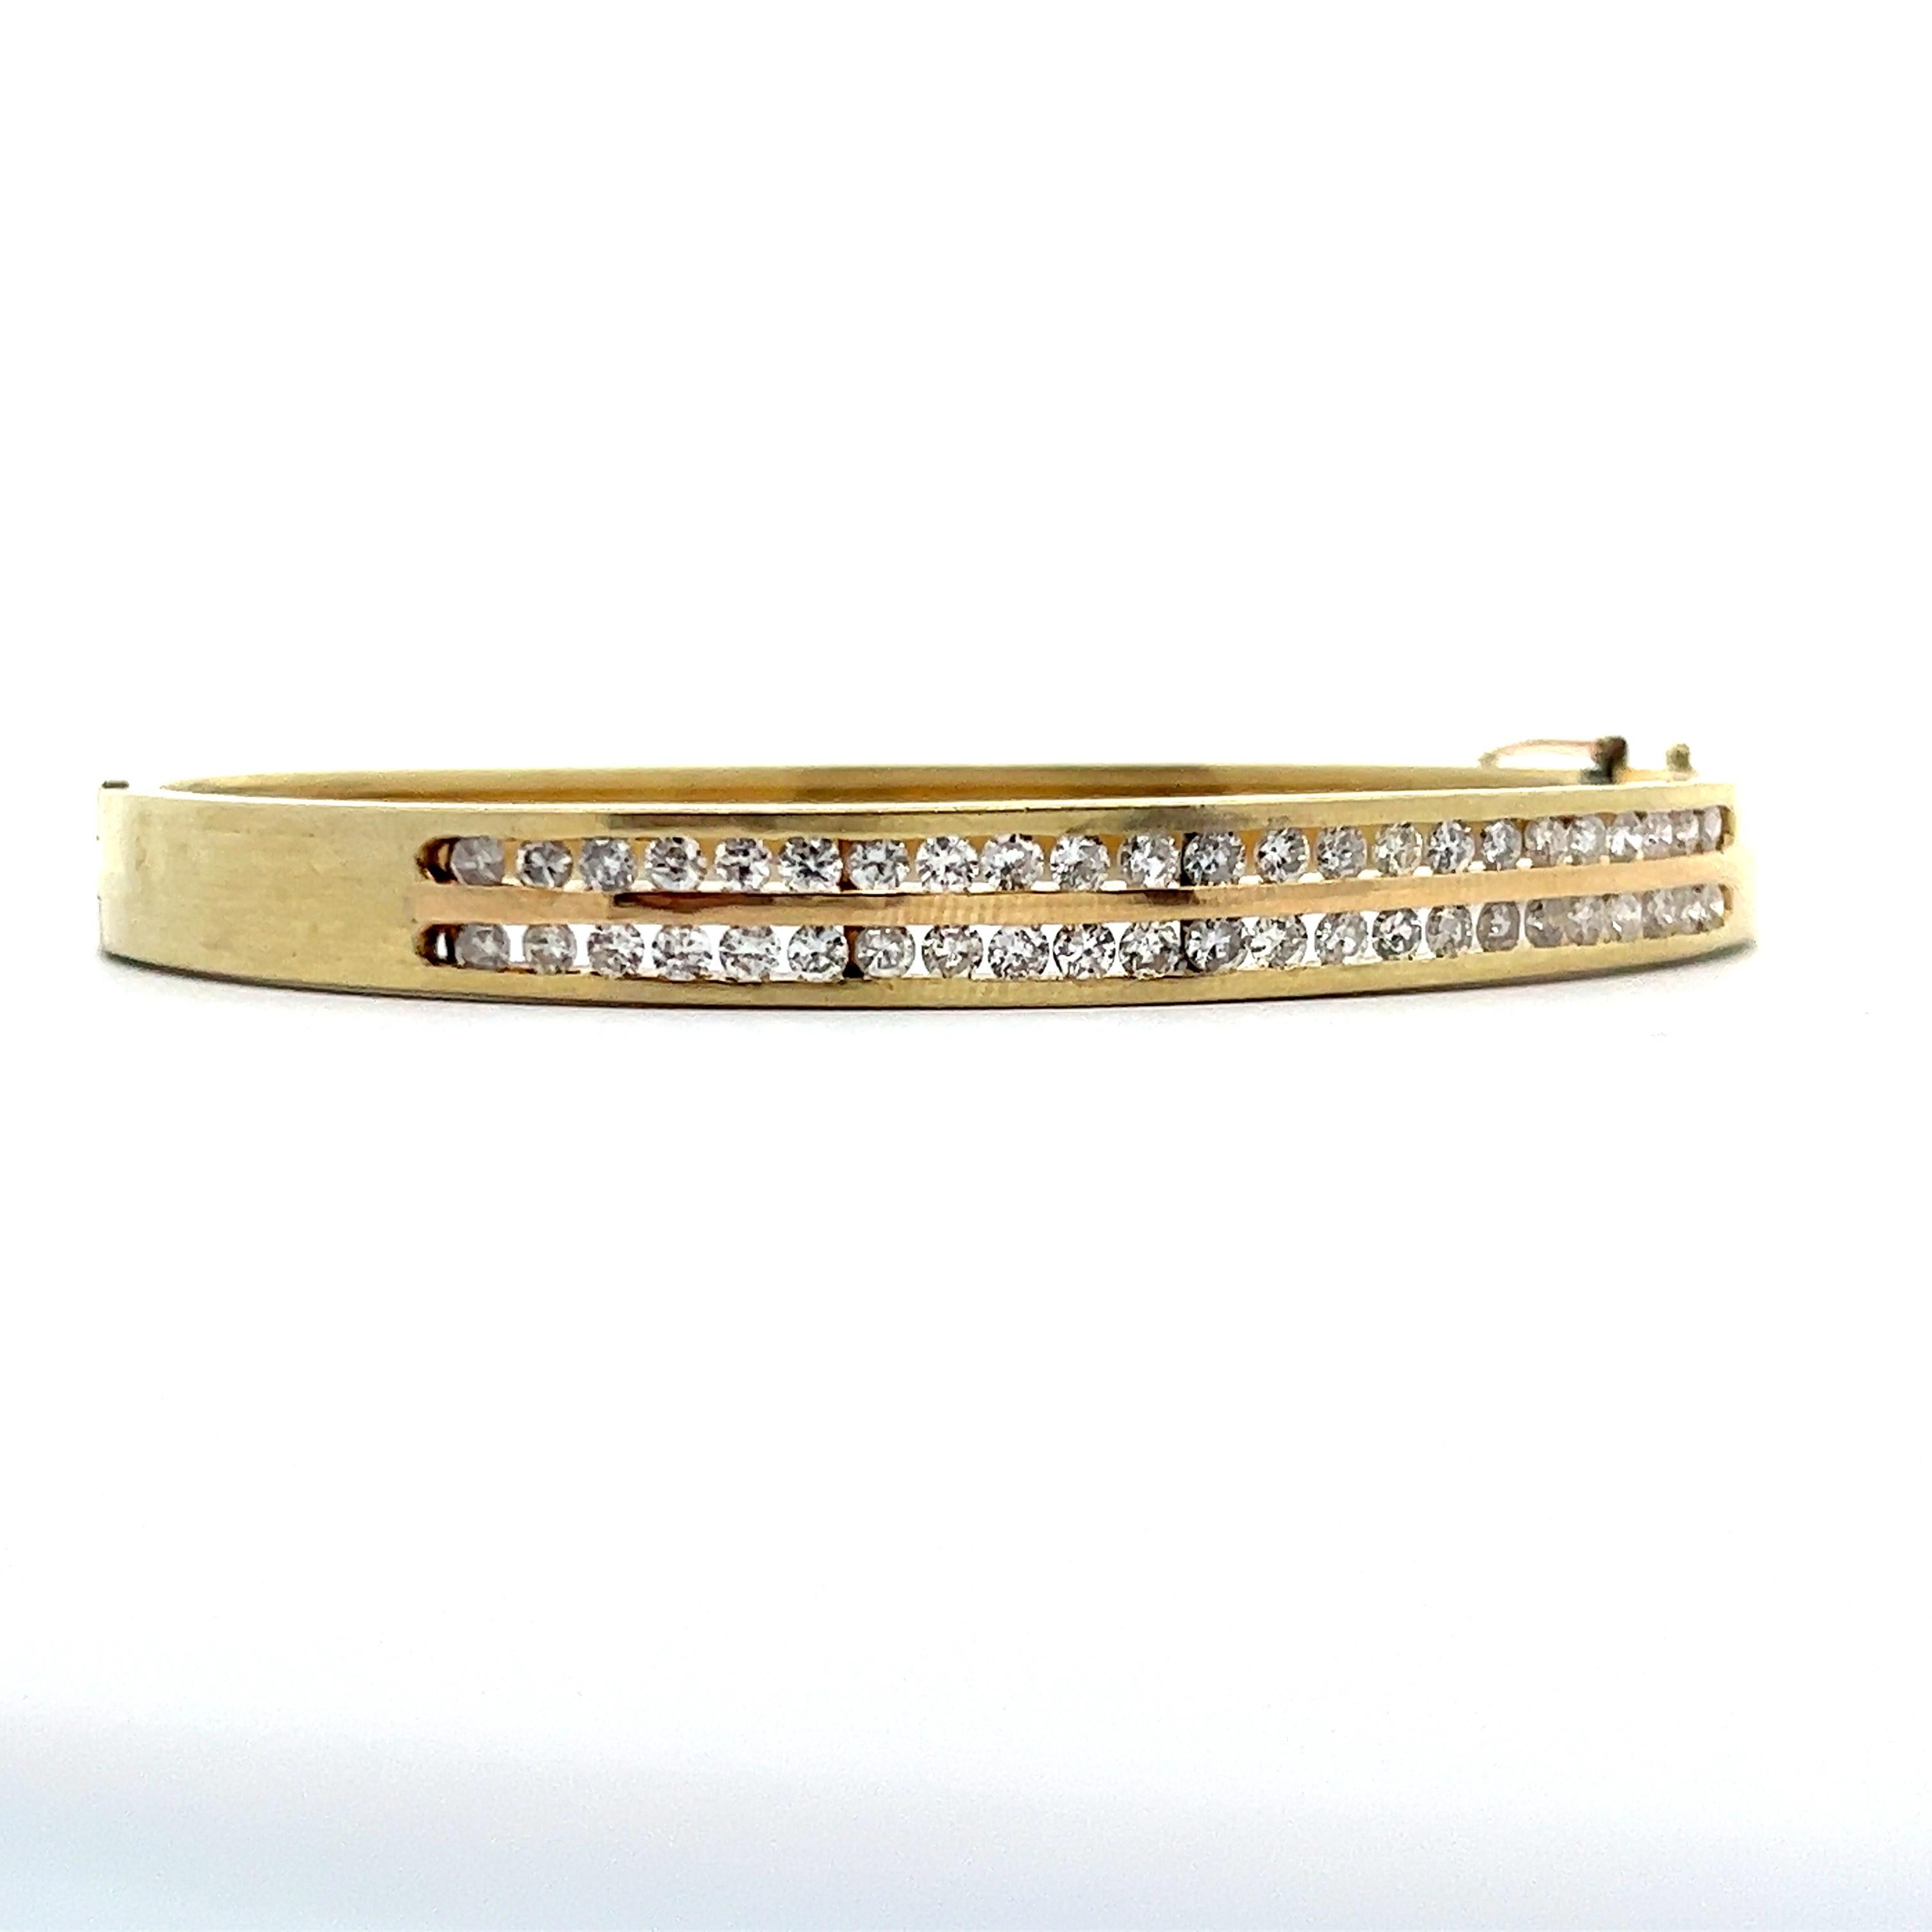 This is a beautiful 14k yellow gold bangle bracelet with two rows of diamonds. This bracelet features a unique design with the two rows of diamonds being channel set and only on one side of the bracelet. This design helps protect the the diamonds by